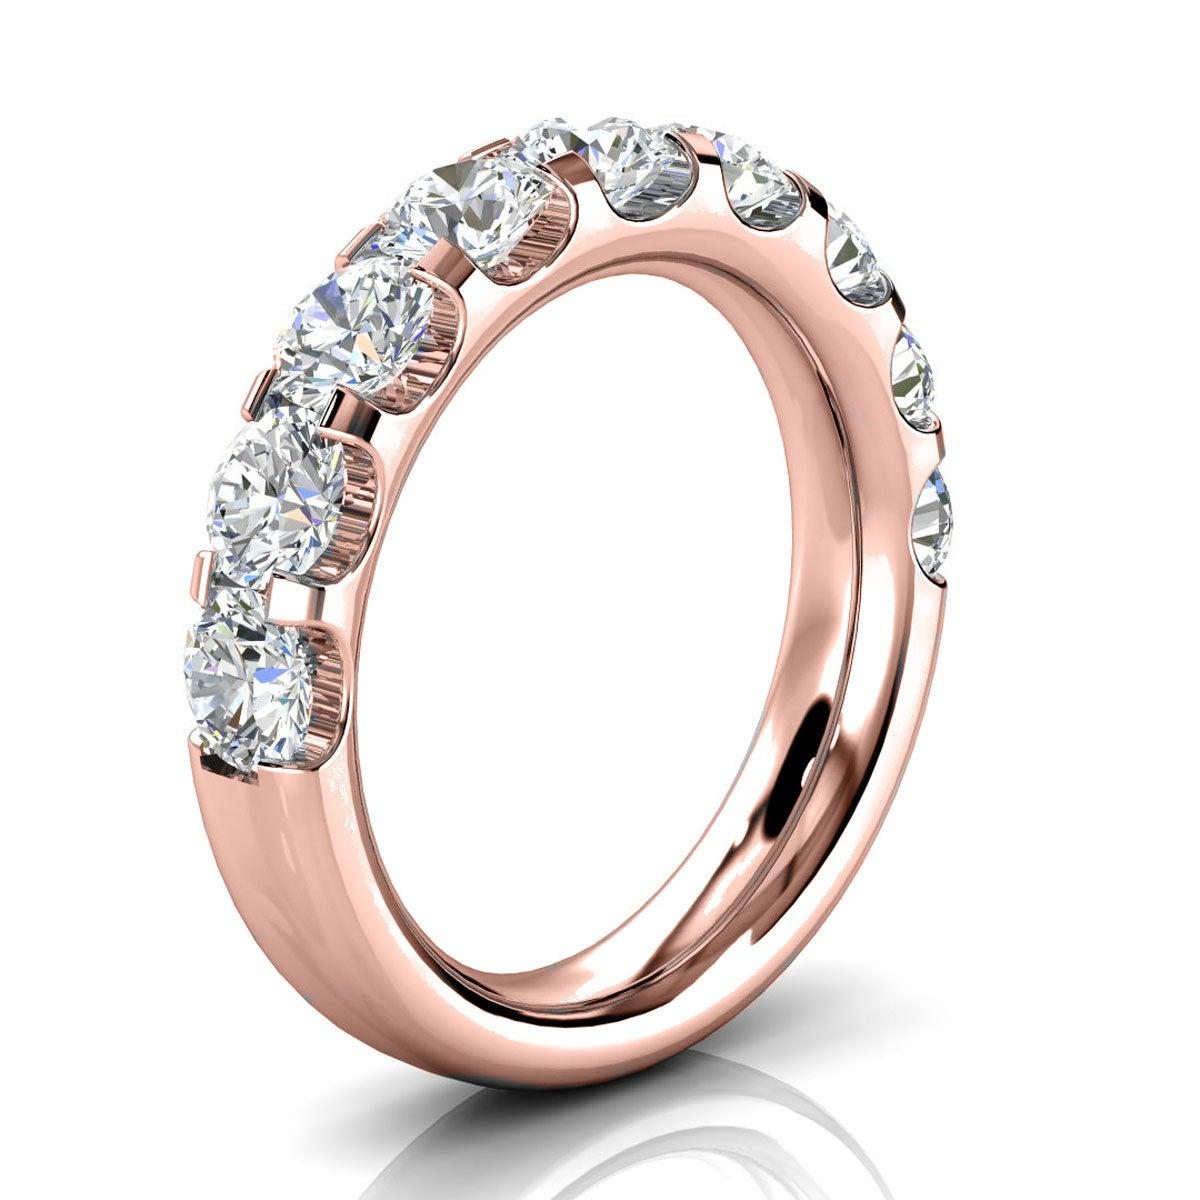 For Sale:  18K Rose Gold Valerie Micro-Prong Diamond Ring '2 Ct. Tw' 2